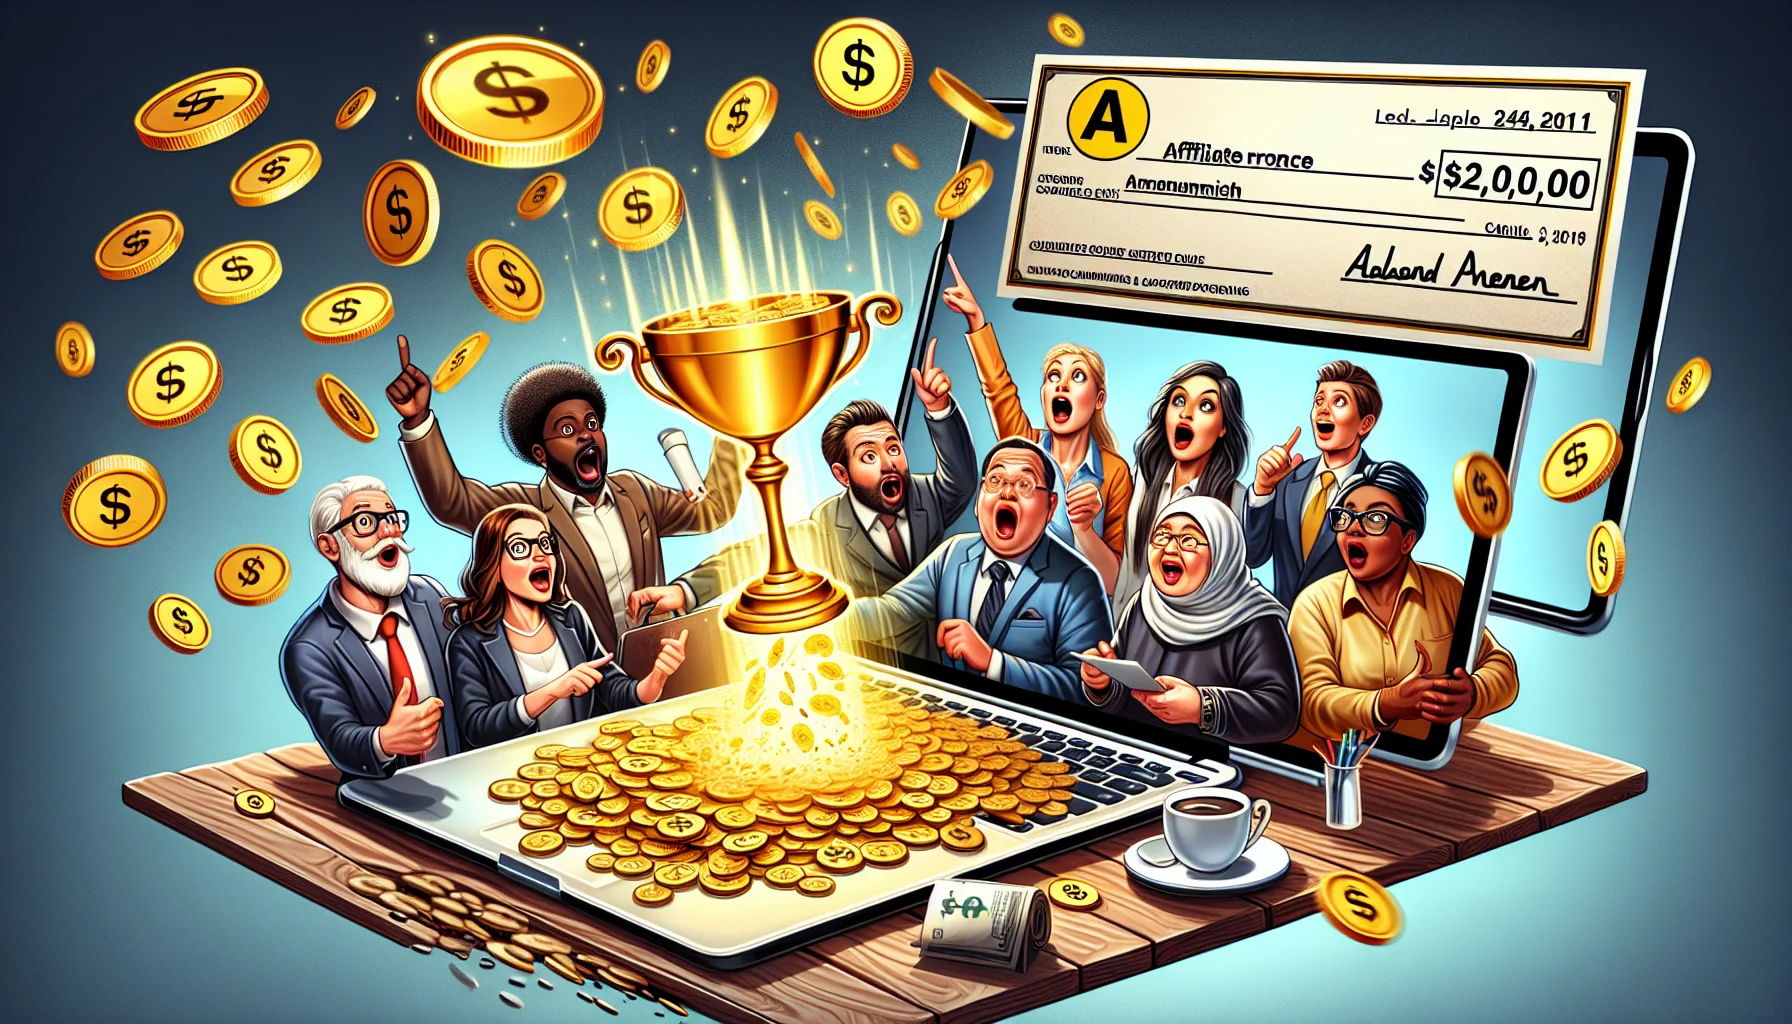 Imagine an amusing and believable scene where an affiliate marketing program is depicted. A giant symbolic 'check' with noticeable money amounts written on it is hovering mid-air above a laptop displaying the letters 'A'. Nearby are multiple diverse people, including a white woman with glasses, a black man with a briefcase, an older Middle-Eastern woman with a shawl and a South Asian man with a coffee cup, all their eyes wide open with a surprised reaction and pointing towards the laptop with excitement. Surrounding them are pop-up chat boxes displaying encouraging statements and dollar symbols. The room is filled with gold coins, flowing out of the laptop screen, indicating the program's lucrative online money-making potential.